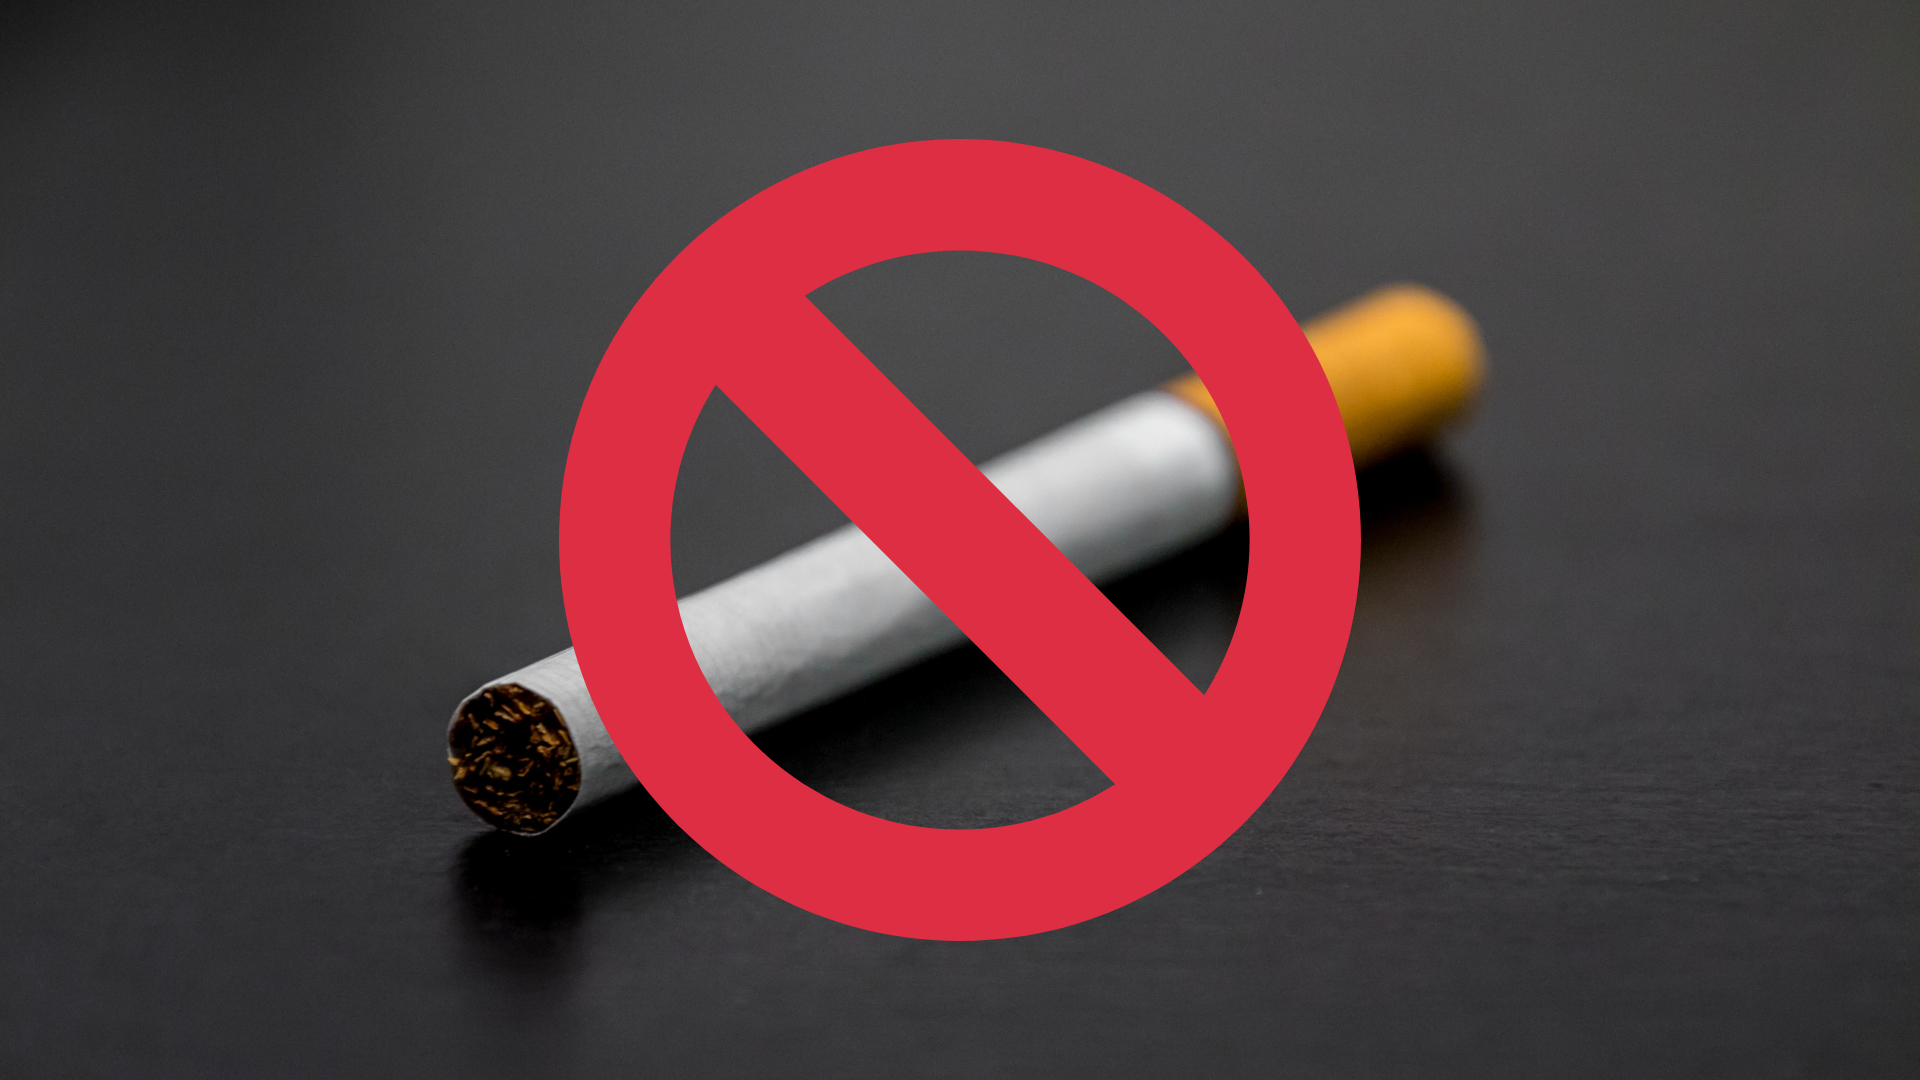 The image is of a cigarette with a red circle-backslash symbol on top of it.